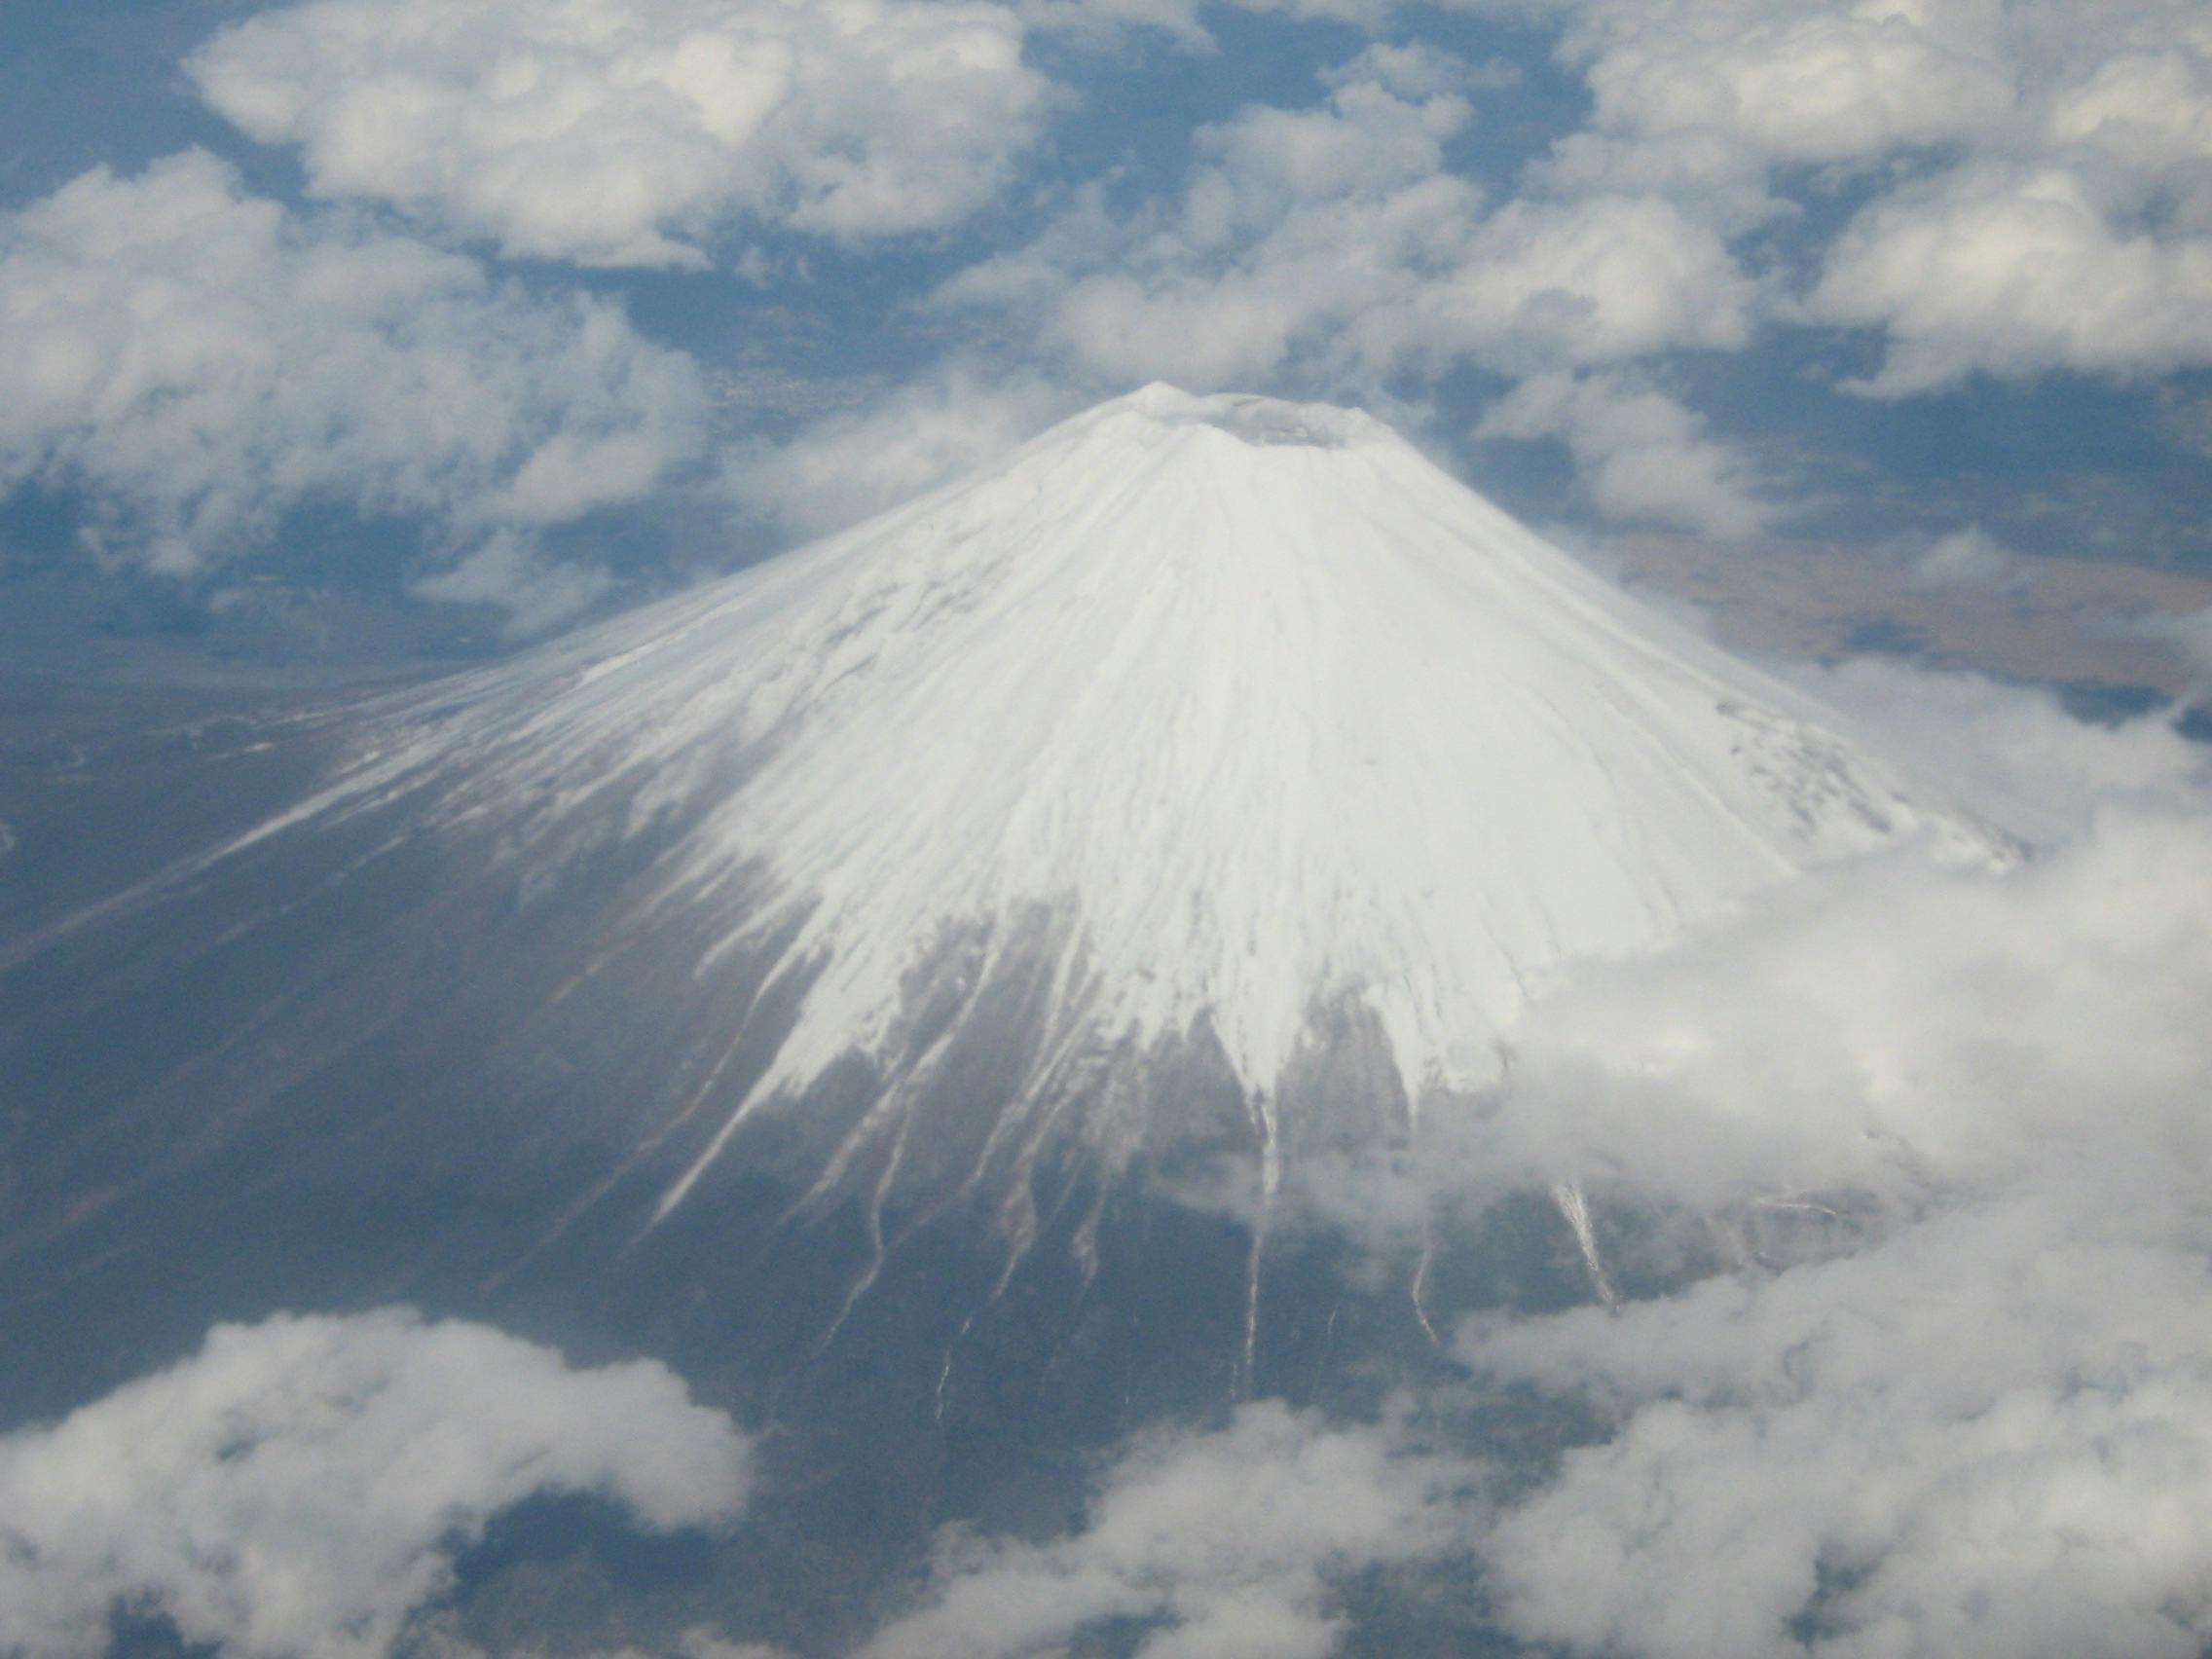 A photo of Mt. Fuji covered in snow, taken from an airplane.